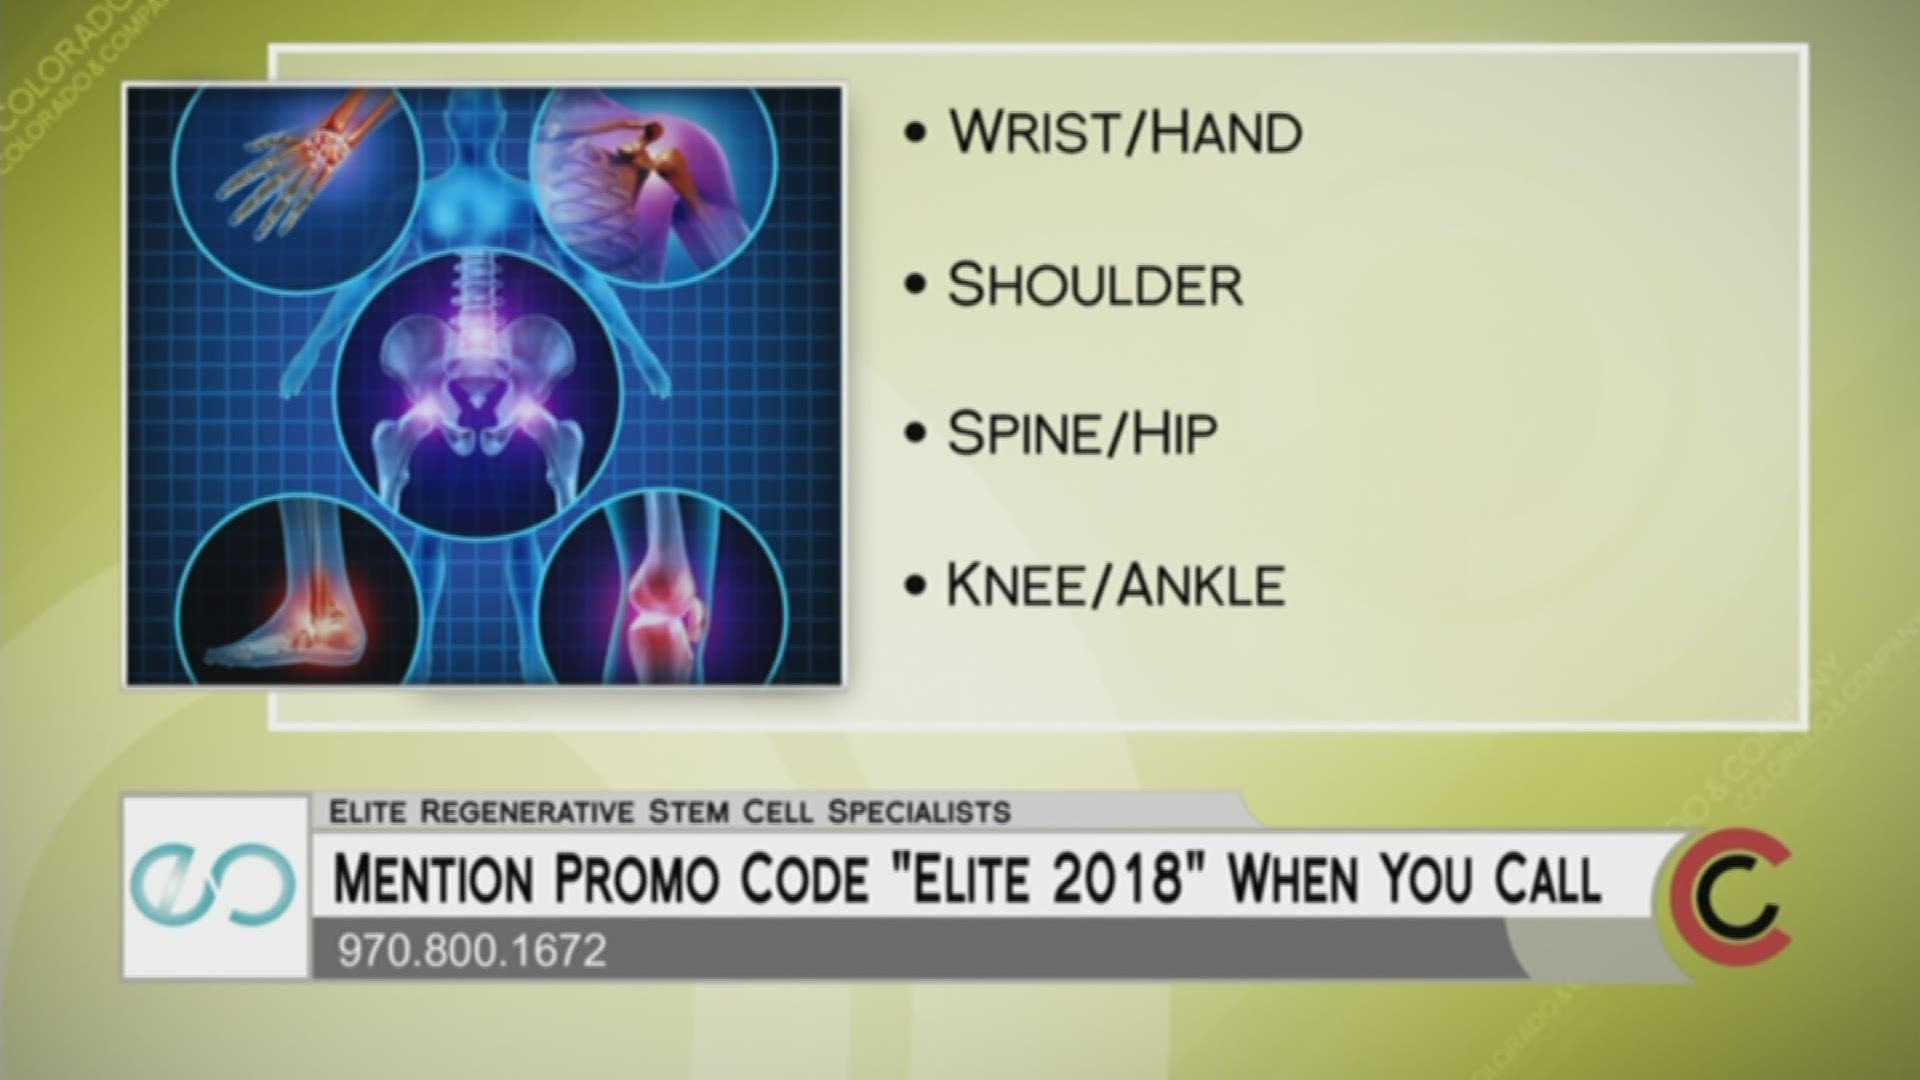 If you're curious about stem cell therapy, give Elite Regenerative Stem Cell Specialists a call. Understand all the treatment options and take advantage of special offers happening now. Just mention the promo code "Elite 2018" when you call. The number is 970.800.1672 and find more helpful information on their website, www.EliteRegen.com.